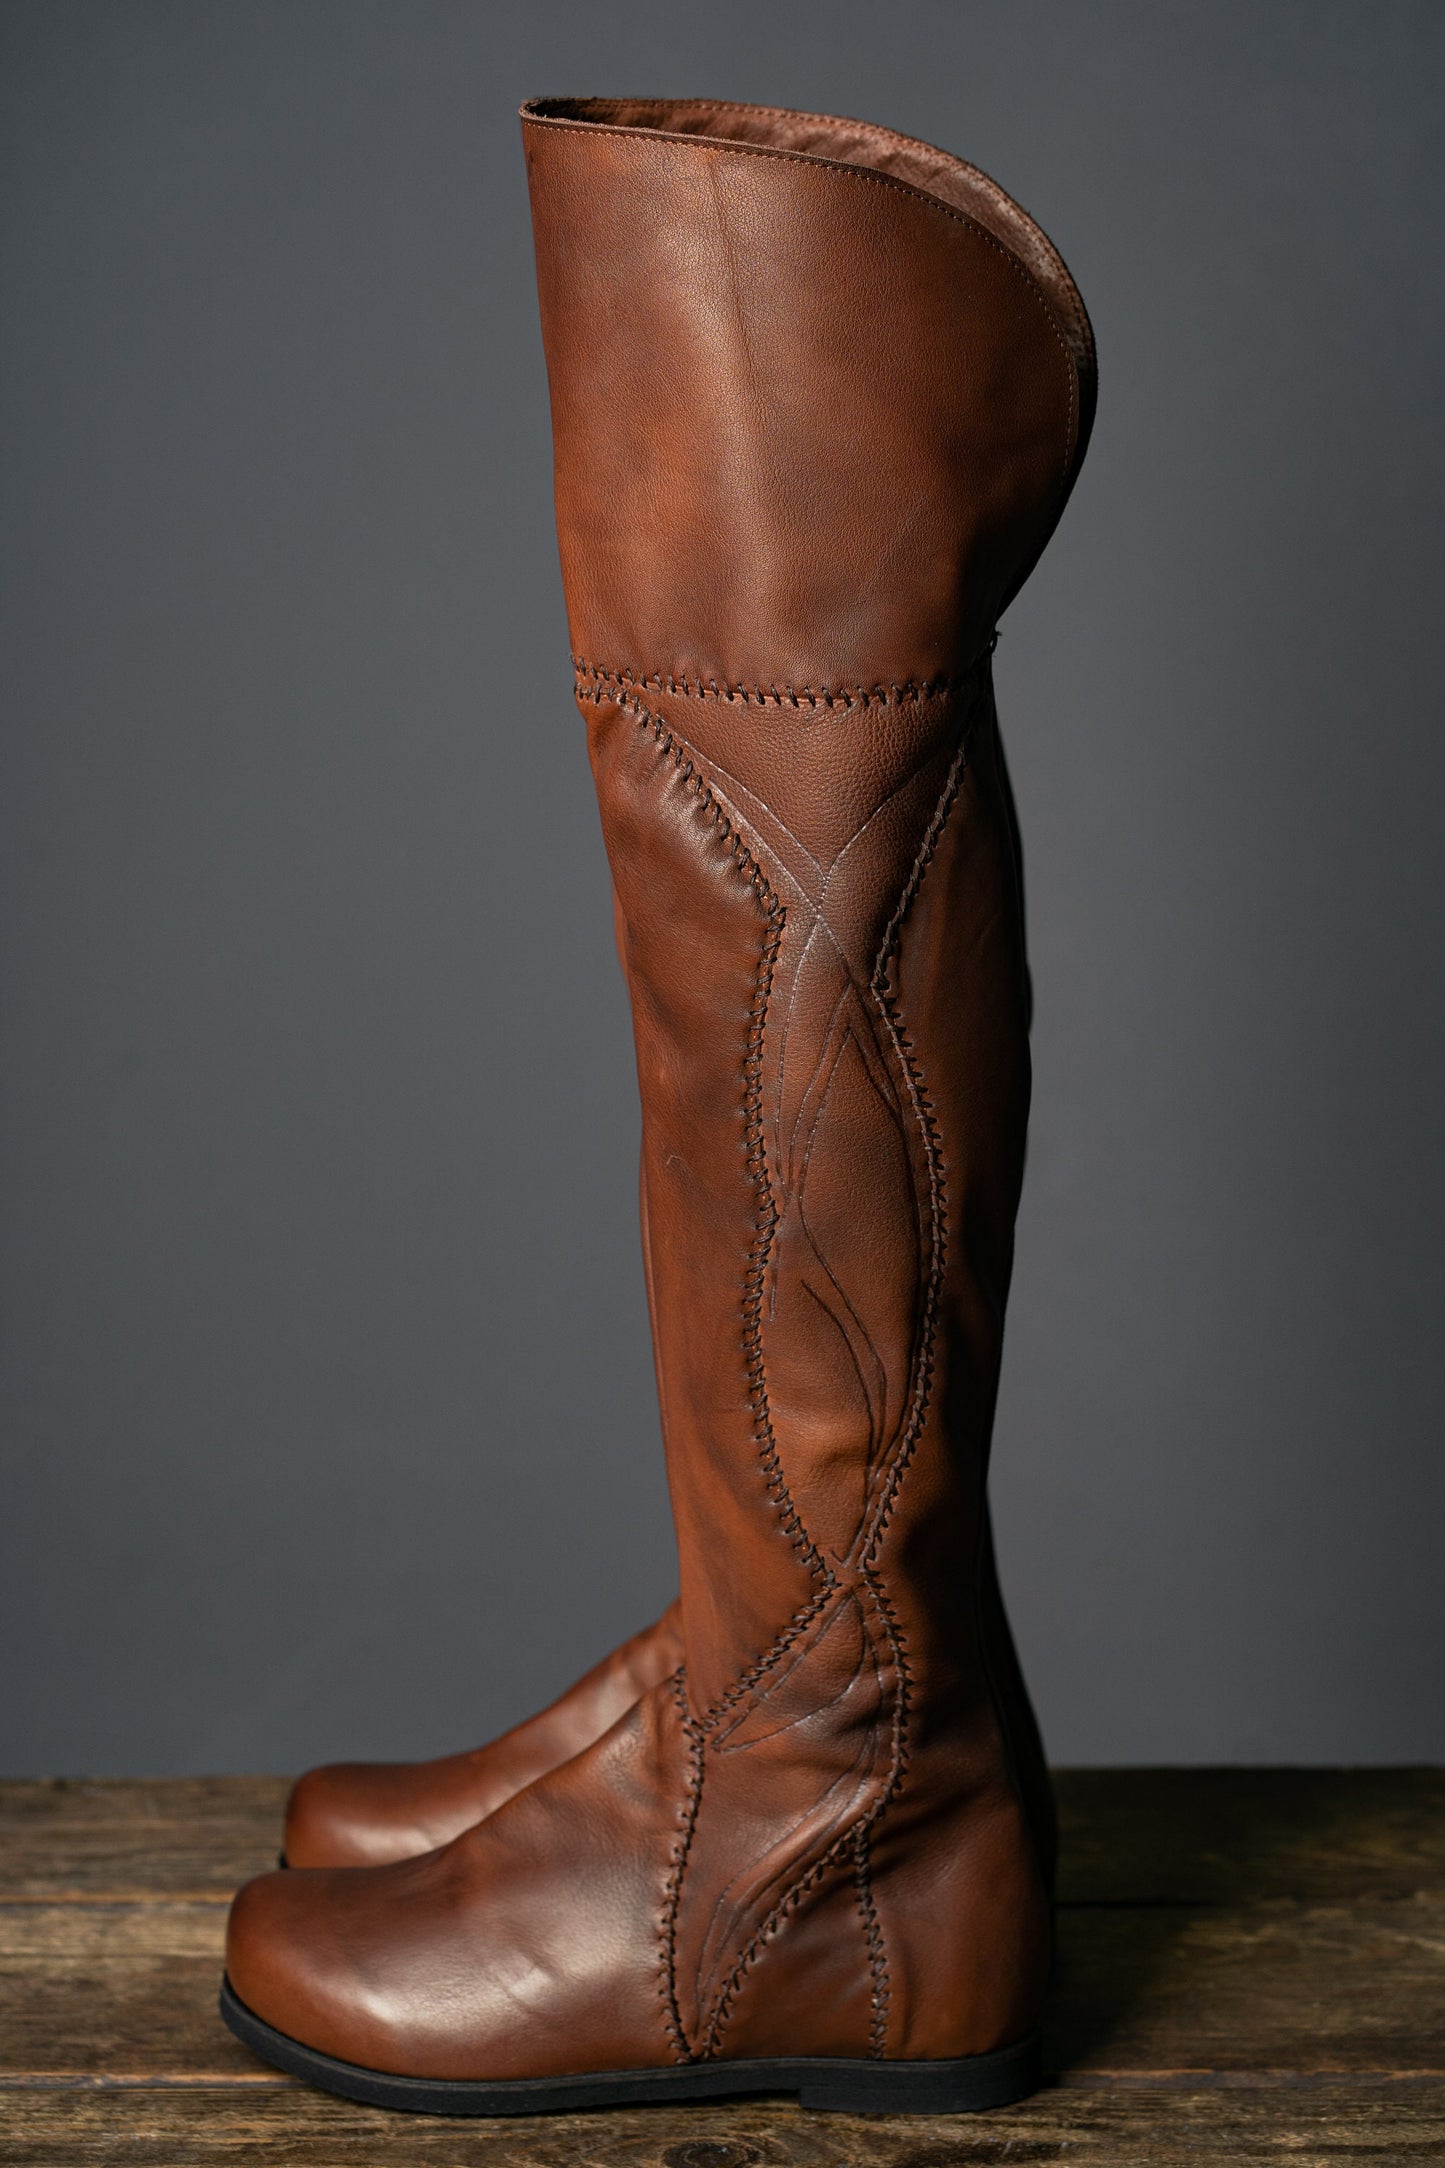 Tauriel leather high boots (The Hobbit)